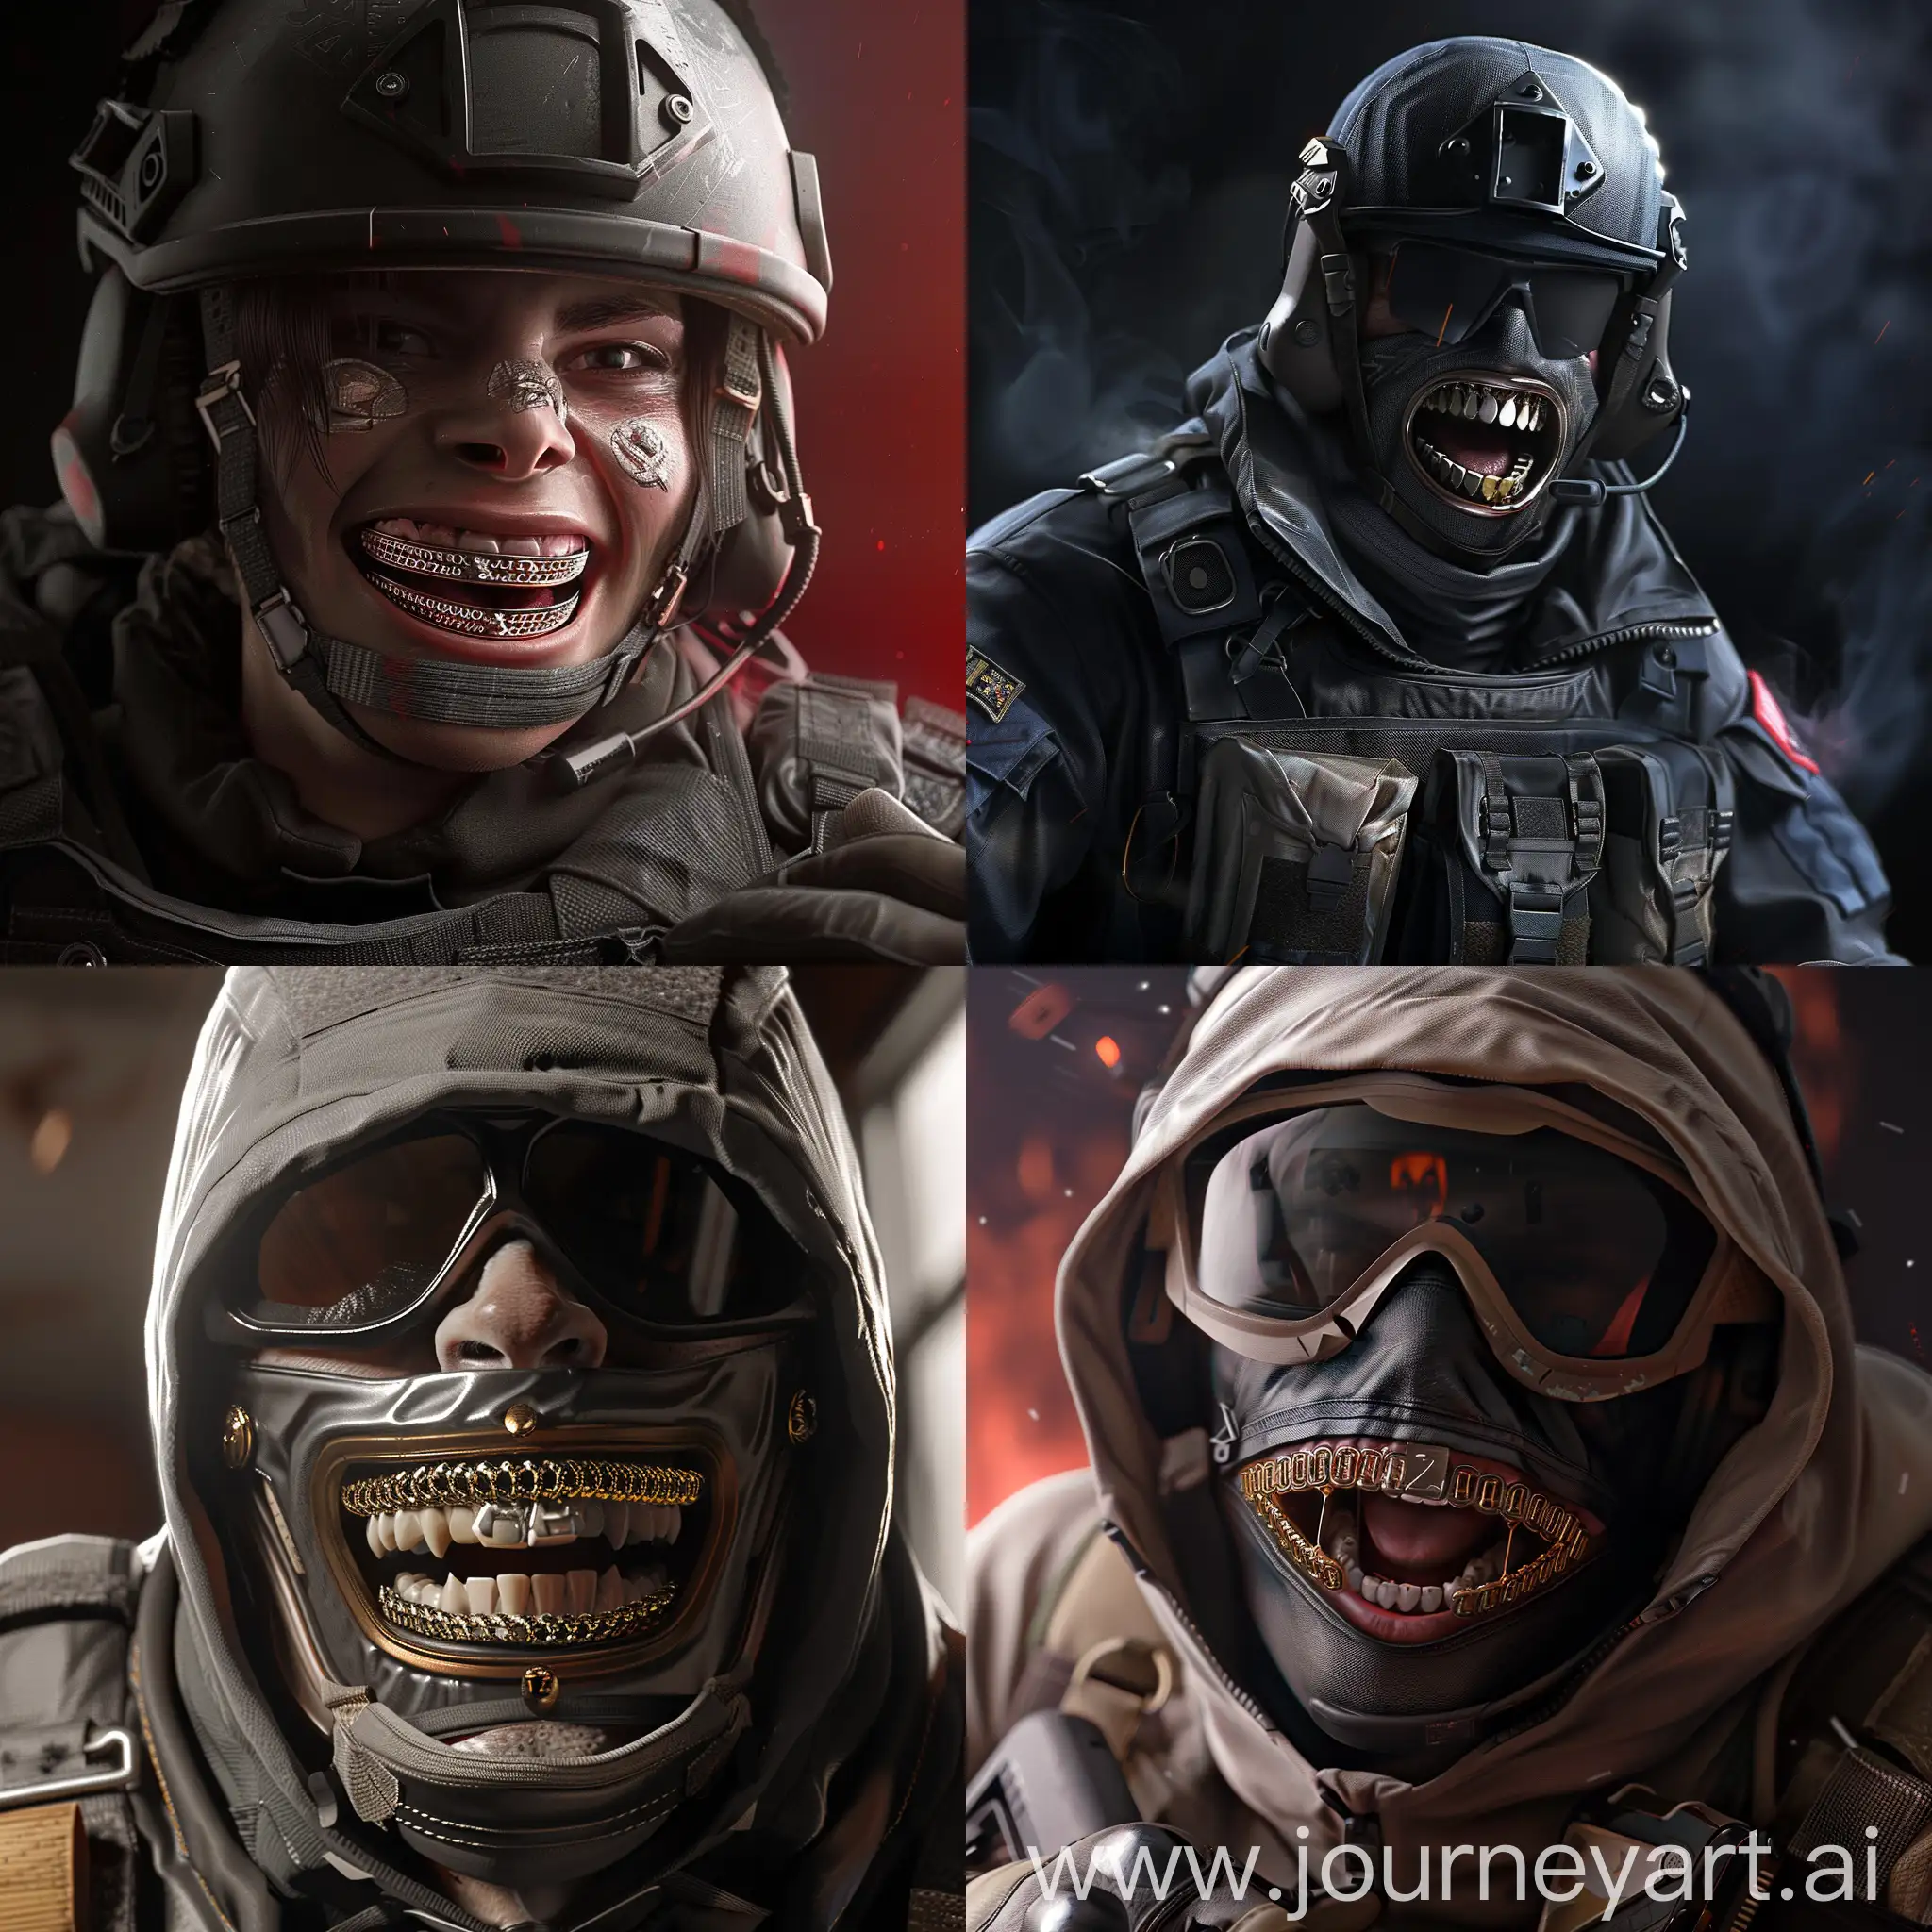 Rainbow-Six-Siege-Character-with-Grillz-in-Action-Pose